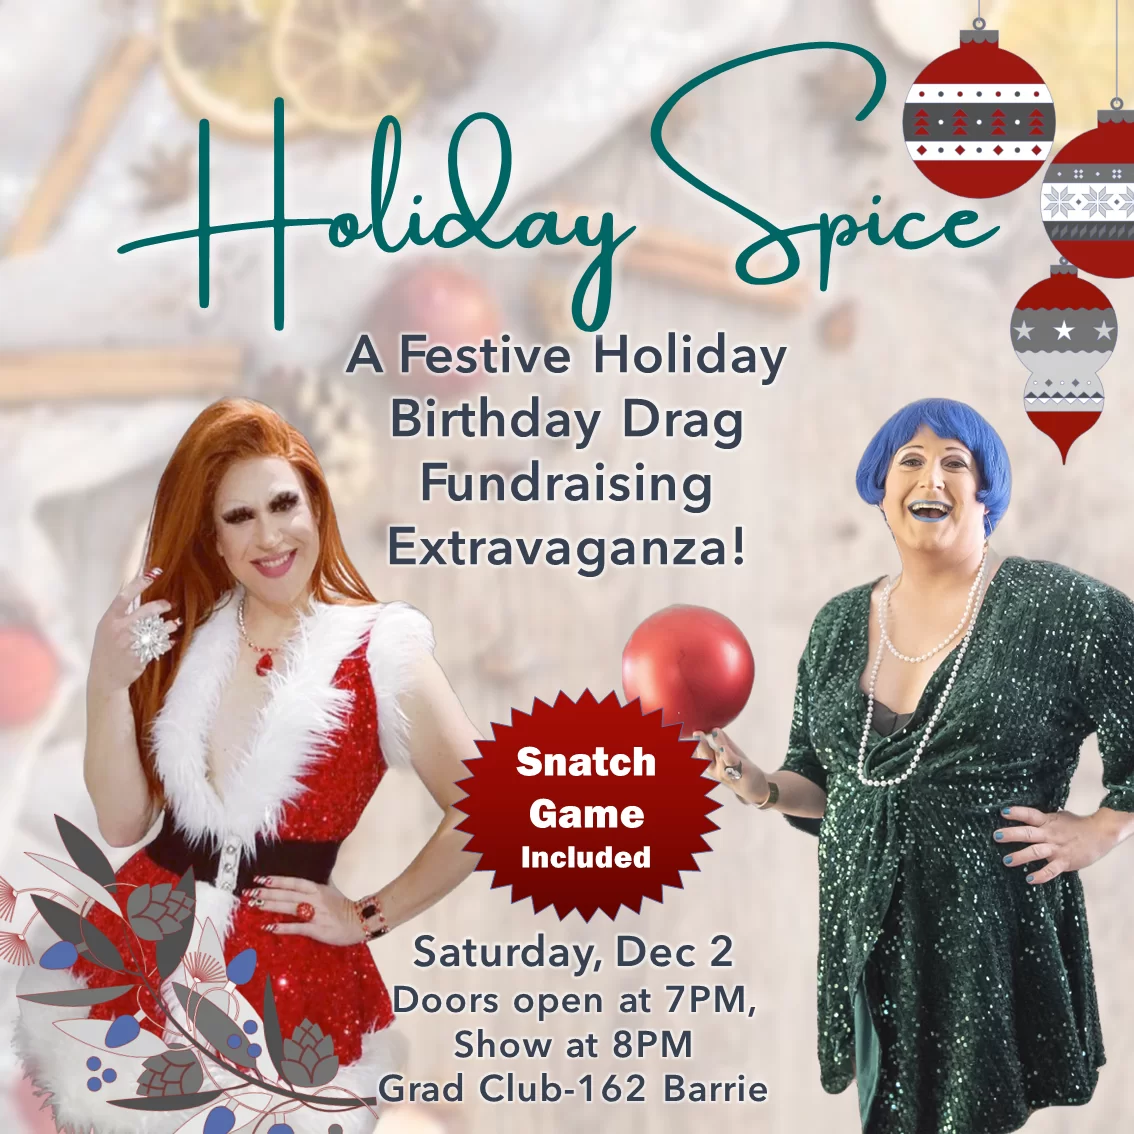 Poster for 'Holiday Spice'. The show date, time, and location are listed. Two drag queens are pictured in holiday wear.